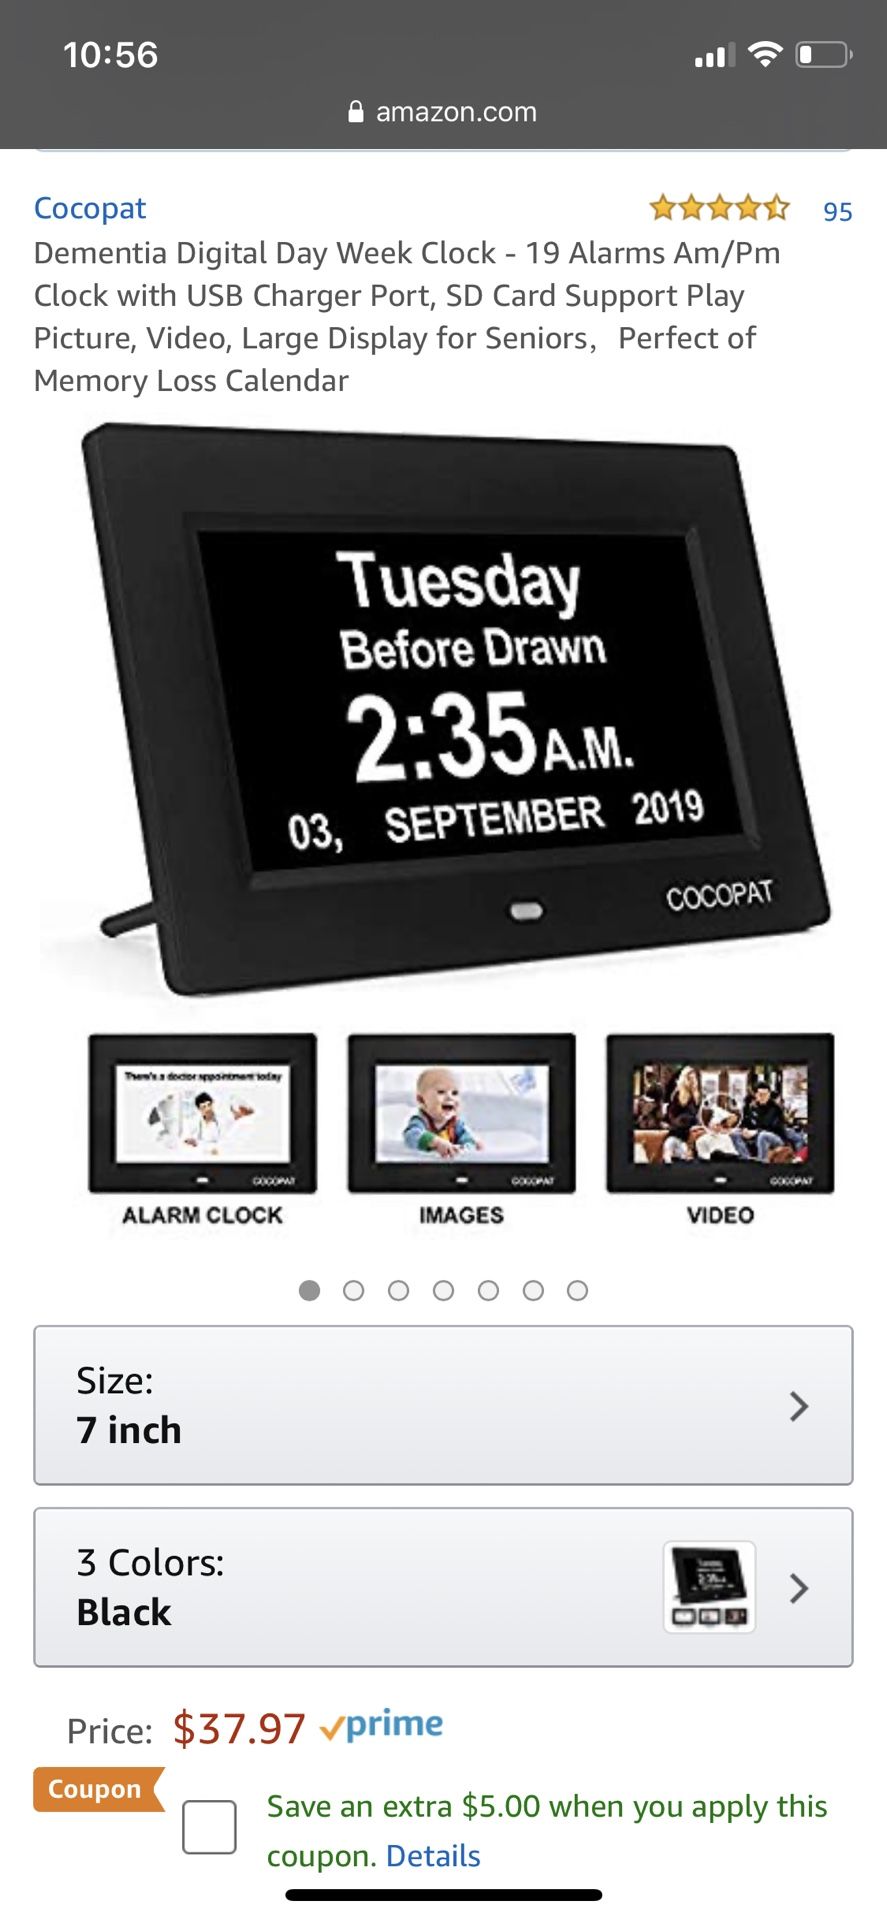 Dementia Digital Day Week Clock - 19 Alarms Am/Pm Clock with USB Charger Port, SD Card Support Play Picture, Video, Large Display for Seniors，Perfect